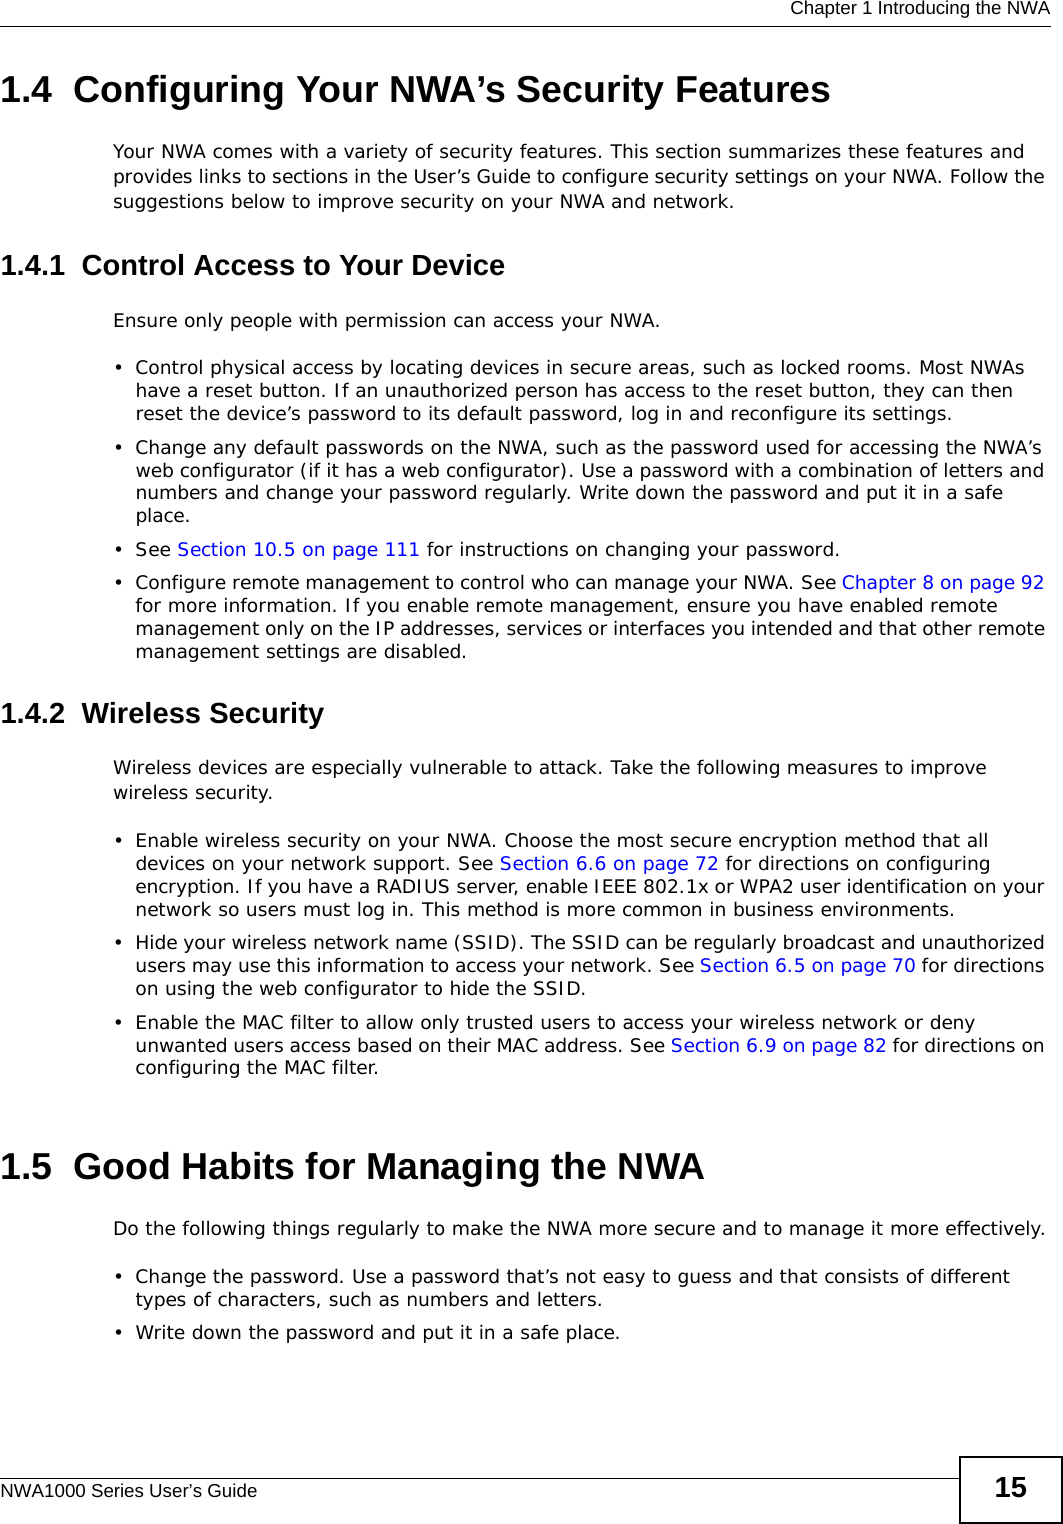  Chapter 1 Introducing the NWANWA1000 Series User’s Guide 151.4  Configuring Your NWA’s Security FeaturesYour NWA comes with a variety of security features. This section summarizes these features and provides links to sections in the User’s Guide to configure security settings on your NWA. Follow the suggestions below to improve security on your NWA and network. 1.4.1  Control Access to Your DeviceEnsure only people with permission can access your NWA.• Control physical access by locating devices in secure areas, such as locked rooms. Most NWAs have a reset button. If an unauthorized person has access to the reset button, they can then reset the device’s password to its default password, log in and reconfigure its settings.• Change any default passwords on the NWA, such as the password used for accessing the NWA’s web configurator (if it has a web configurator). Use a password with a combination of letters and numbers and change your password regularly. Write down the password and put it in a safe place.•See Section 10.5 on page 111 for instructions on changing your password.• Configure remote management to control who can manage your NWA. See Chapter 8 on page 92 for more information. If you enable remote management, ensure you have enabled remote management only on the IP addresses, services or interfaces you intended and that other remote management settings are disabled.1.4.2  Wireless Security Wireless devices are especially vulnerable to attack. Take the following measures to improve wireless security.• Enable wireless security on your NWA. Choose the most secure encryption method that all devices on your network support. See Section 6.6 on page 72 for directions on configuring encryption. If you have a RADIUS server, enable IEEE 802.1x or WPA2 user identification on your network so users must log in. This method is more common in business environments.   • Hide your wireless network name (SSID). The SSID can be regularly broadcast and unauthorized users may use this information to access your network. See Section 6.5 on page 70 for directions on using the web configurator to hide the SSID. • Enable the MAC filter to allow only trusted users to access your wireless network or deny unwanted users access based on their MAC address. See Section 6.9 on page 82 for directions on configuring the MAC filter. 1.5  Good Habits for Managing the NWADo the following things regularly to make the NWA more secure and to manage it more effectively.• Change the password. Use a password that’s not easy to guess and that consists of different types of characters, such as numbers and letters.• Write down the password and put it in a safe place.